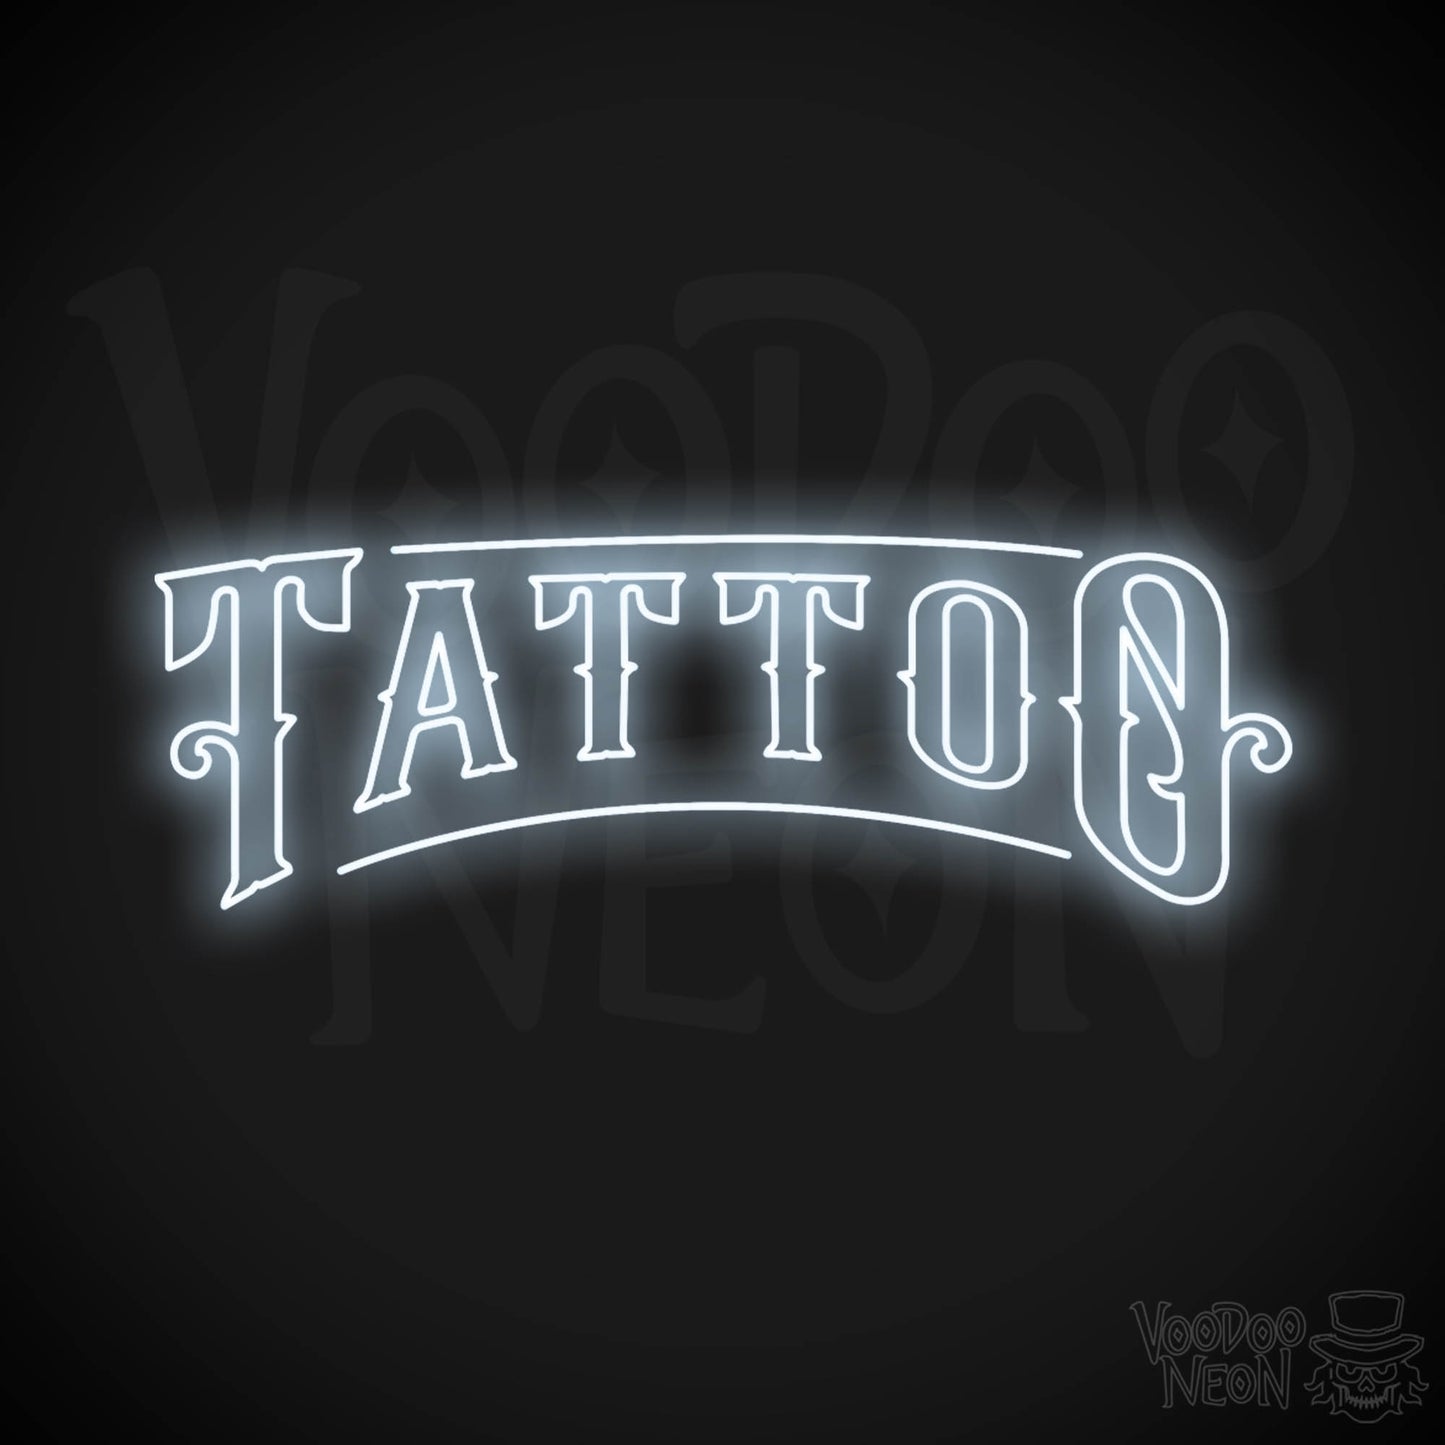 Tattoo Parlor LED Neon - Cool White